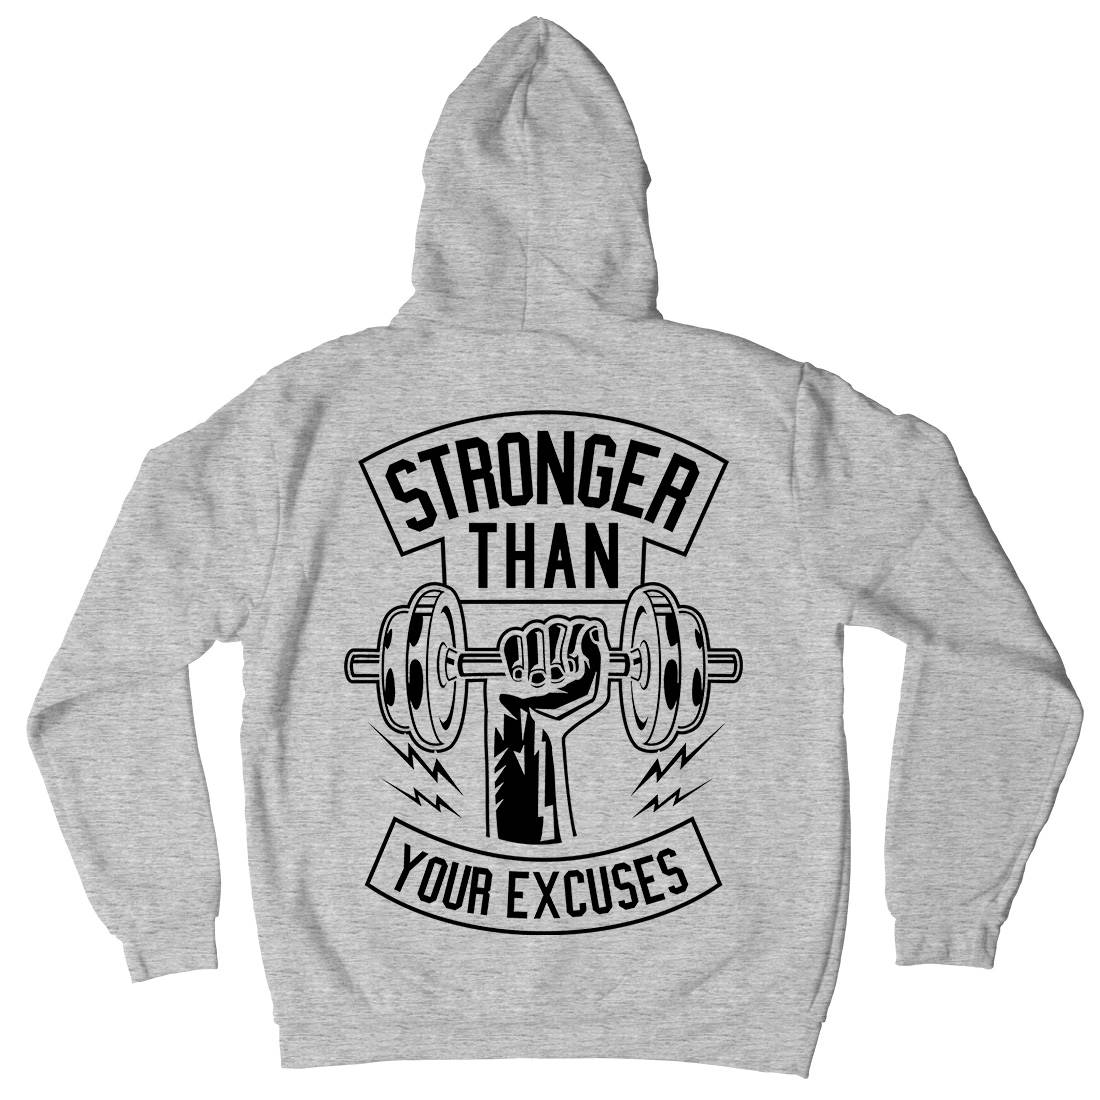 Stronger Than Your Excuses Kids Crew Neck Hoodie Gym B644